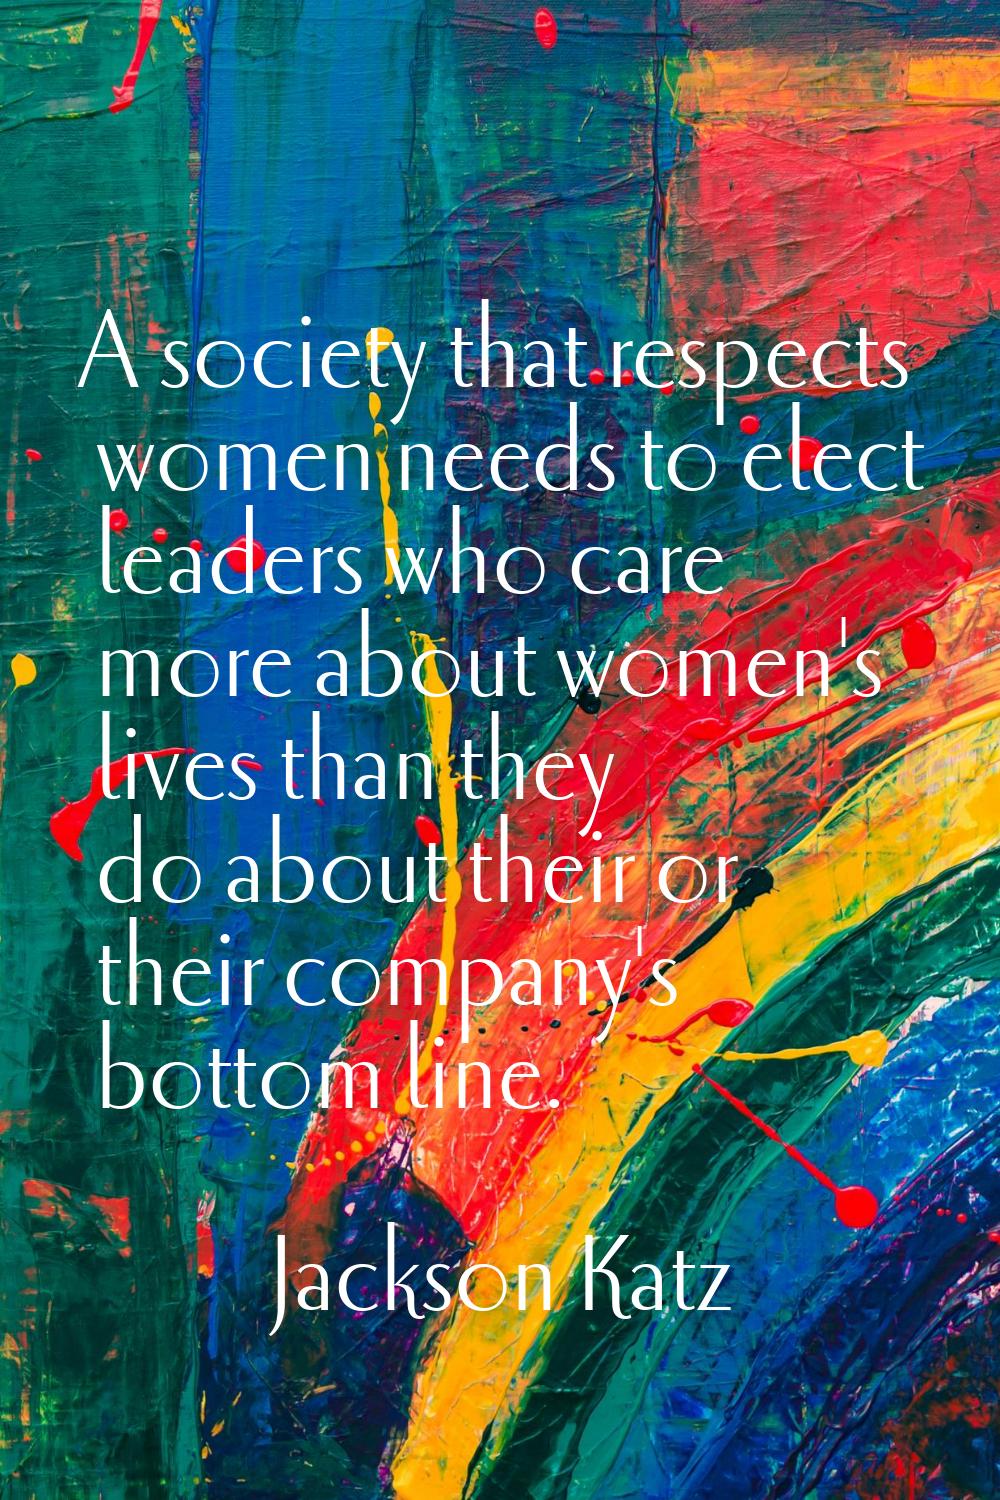 A society that respects women needs to elect leaders who care more about women's lives than they do